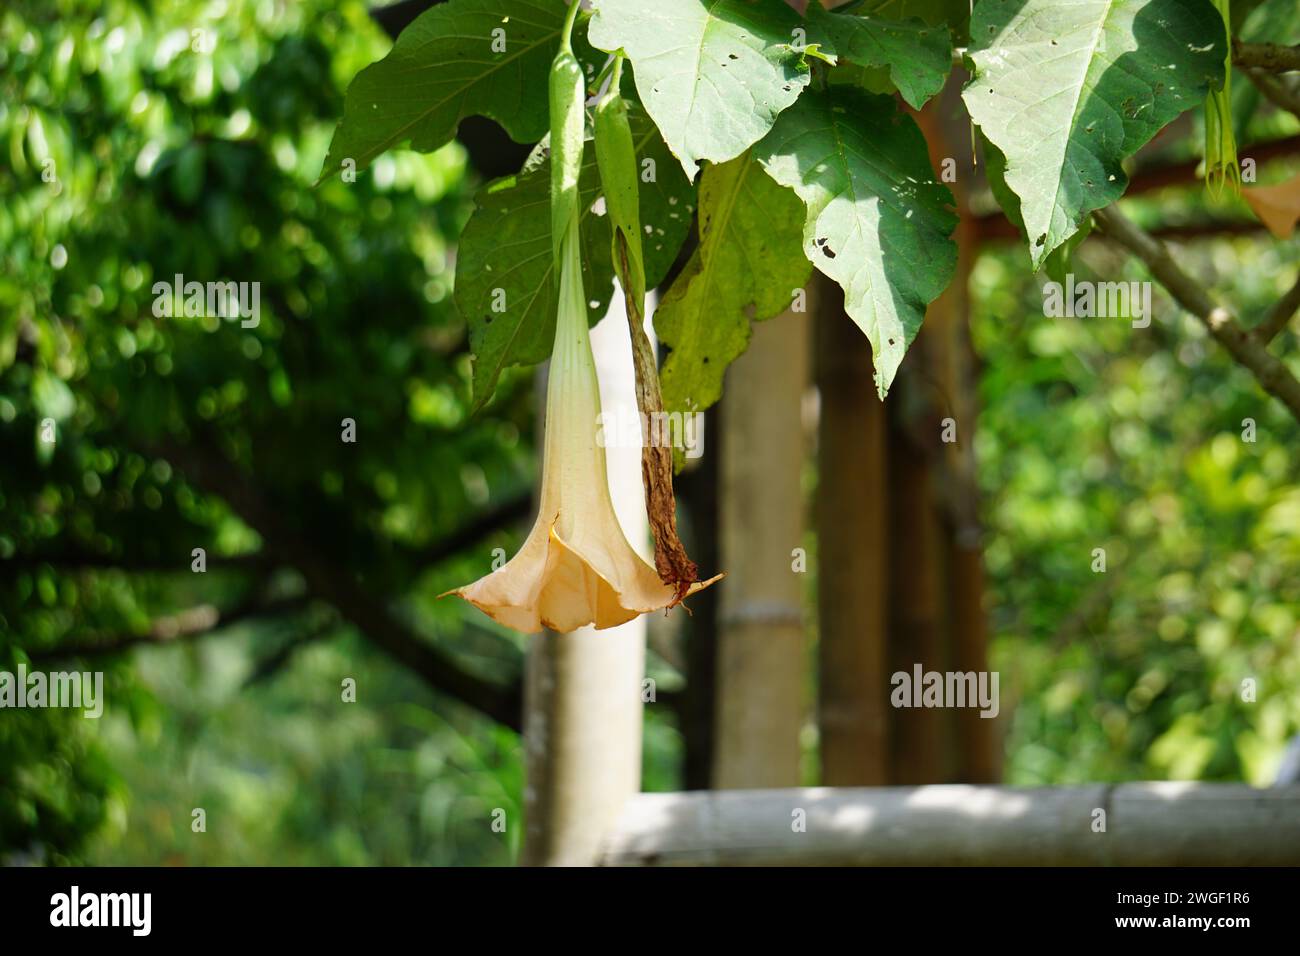 Brugmansia arborea (Brugmansia suaveolens)in nature. Brugmansia arborea is an evergreen shrub or small tree reaching up to 7 metres (23 ft) in height Stock Photo